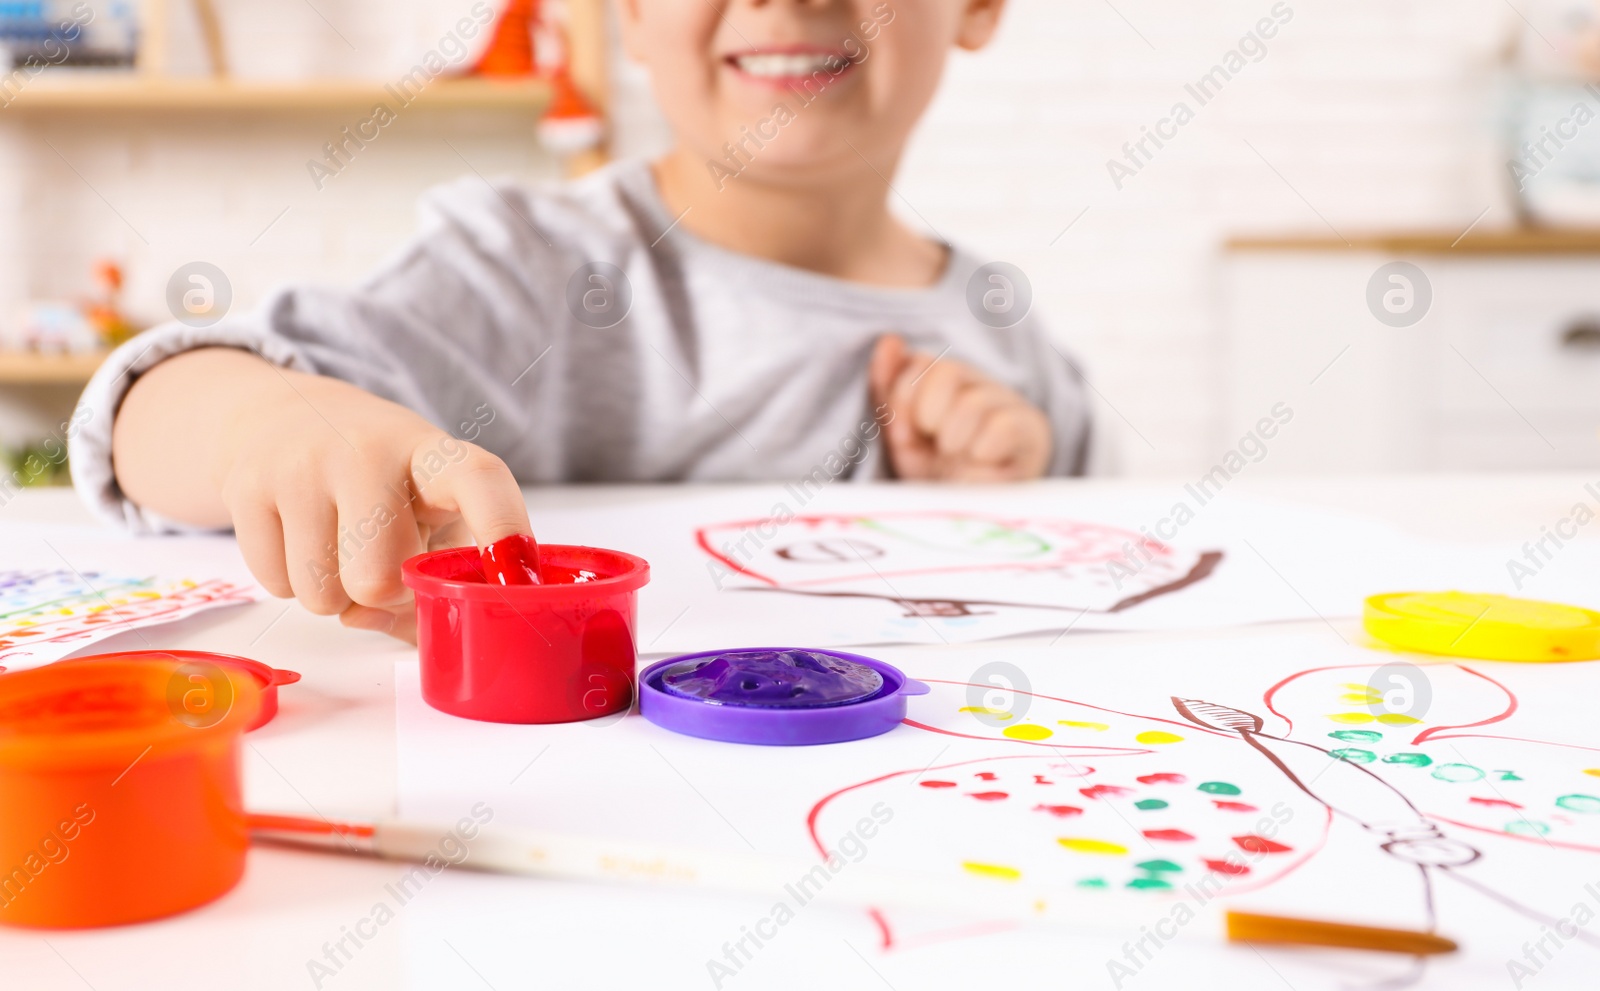 Photo of Little boy painting with finger at white table indoors, focus on hand